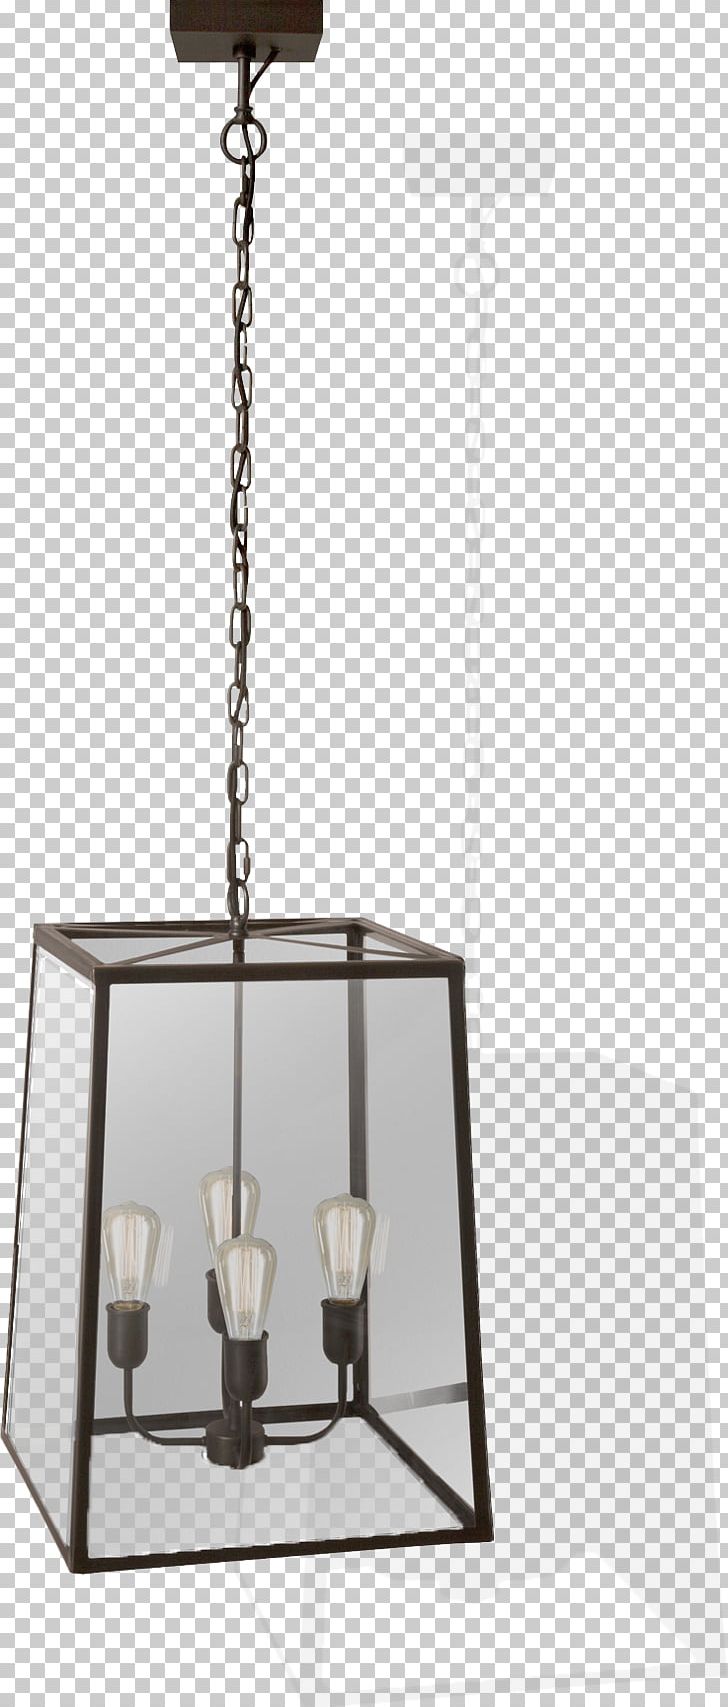 NOLA Smokehouse Chandelier Ceiling PNG, Clipart, Bar, Ceiling, Ceiling Fixture, Chandelier, Light Fixture Free PNG Download